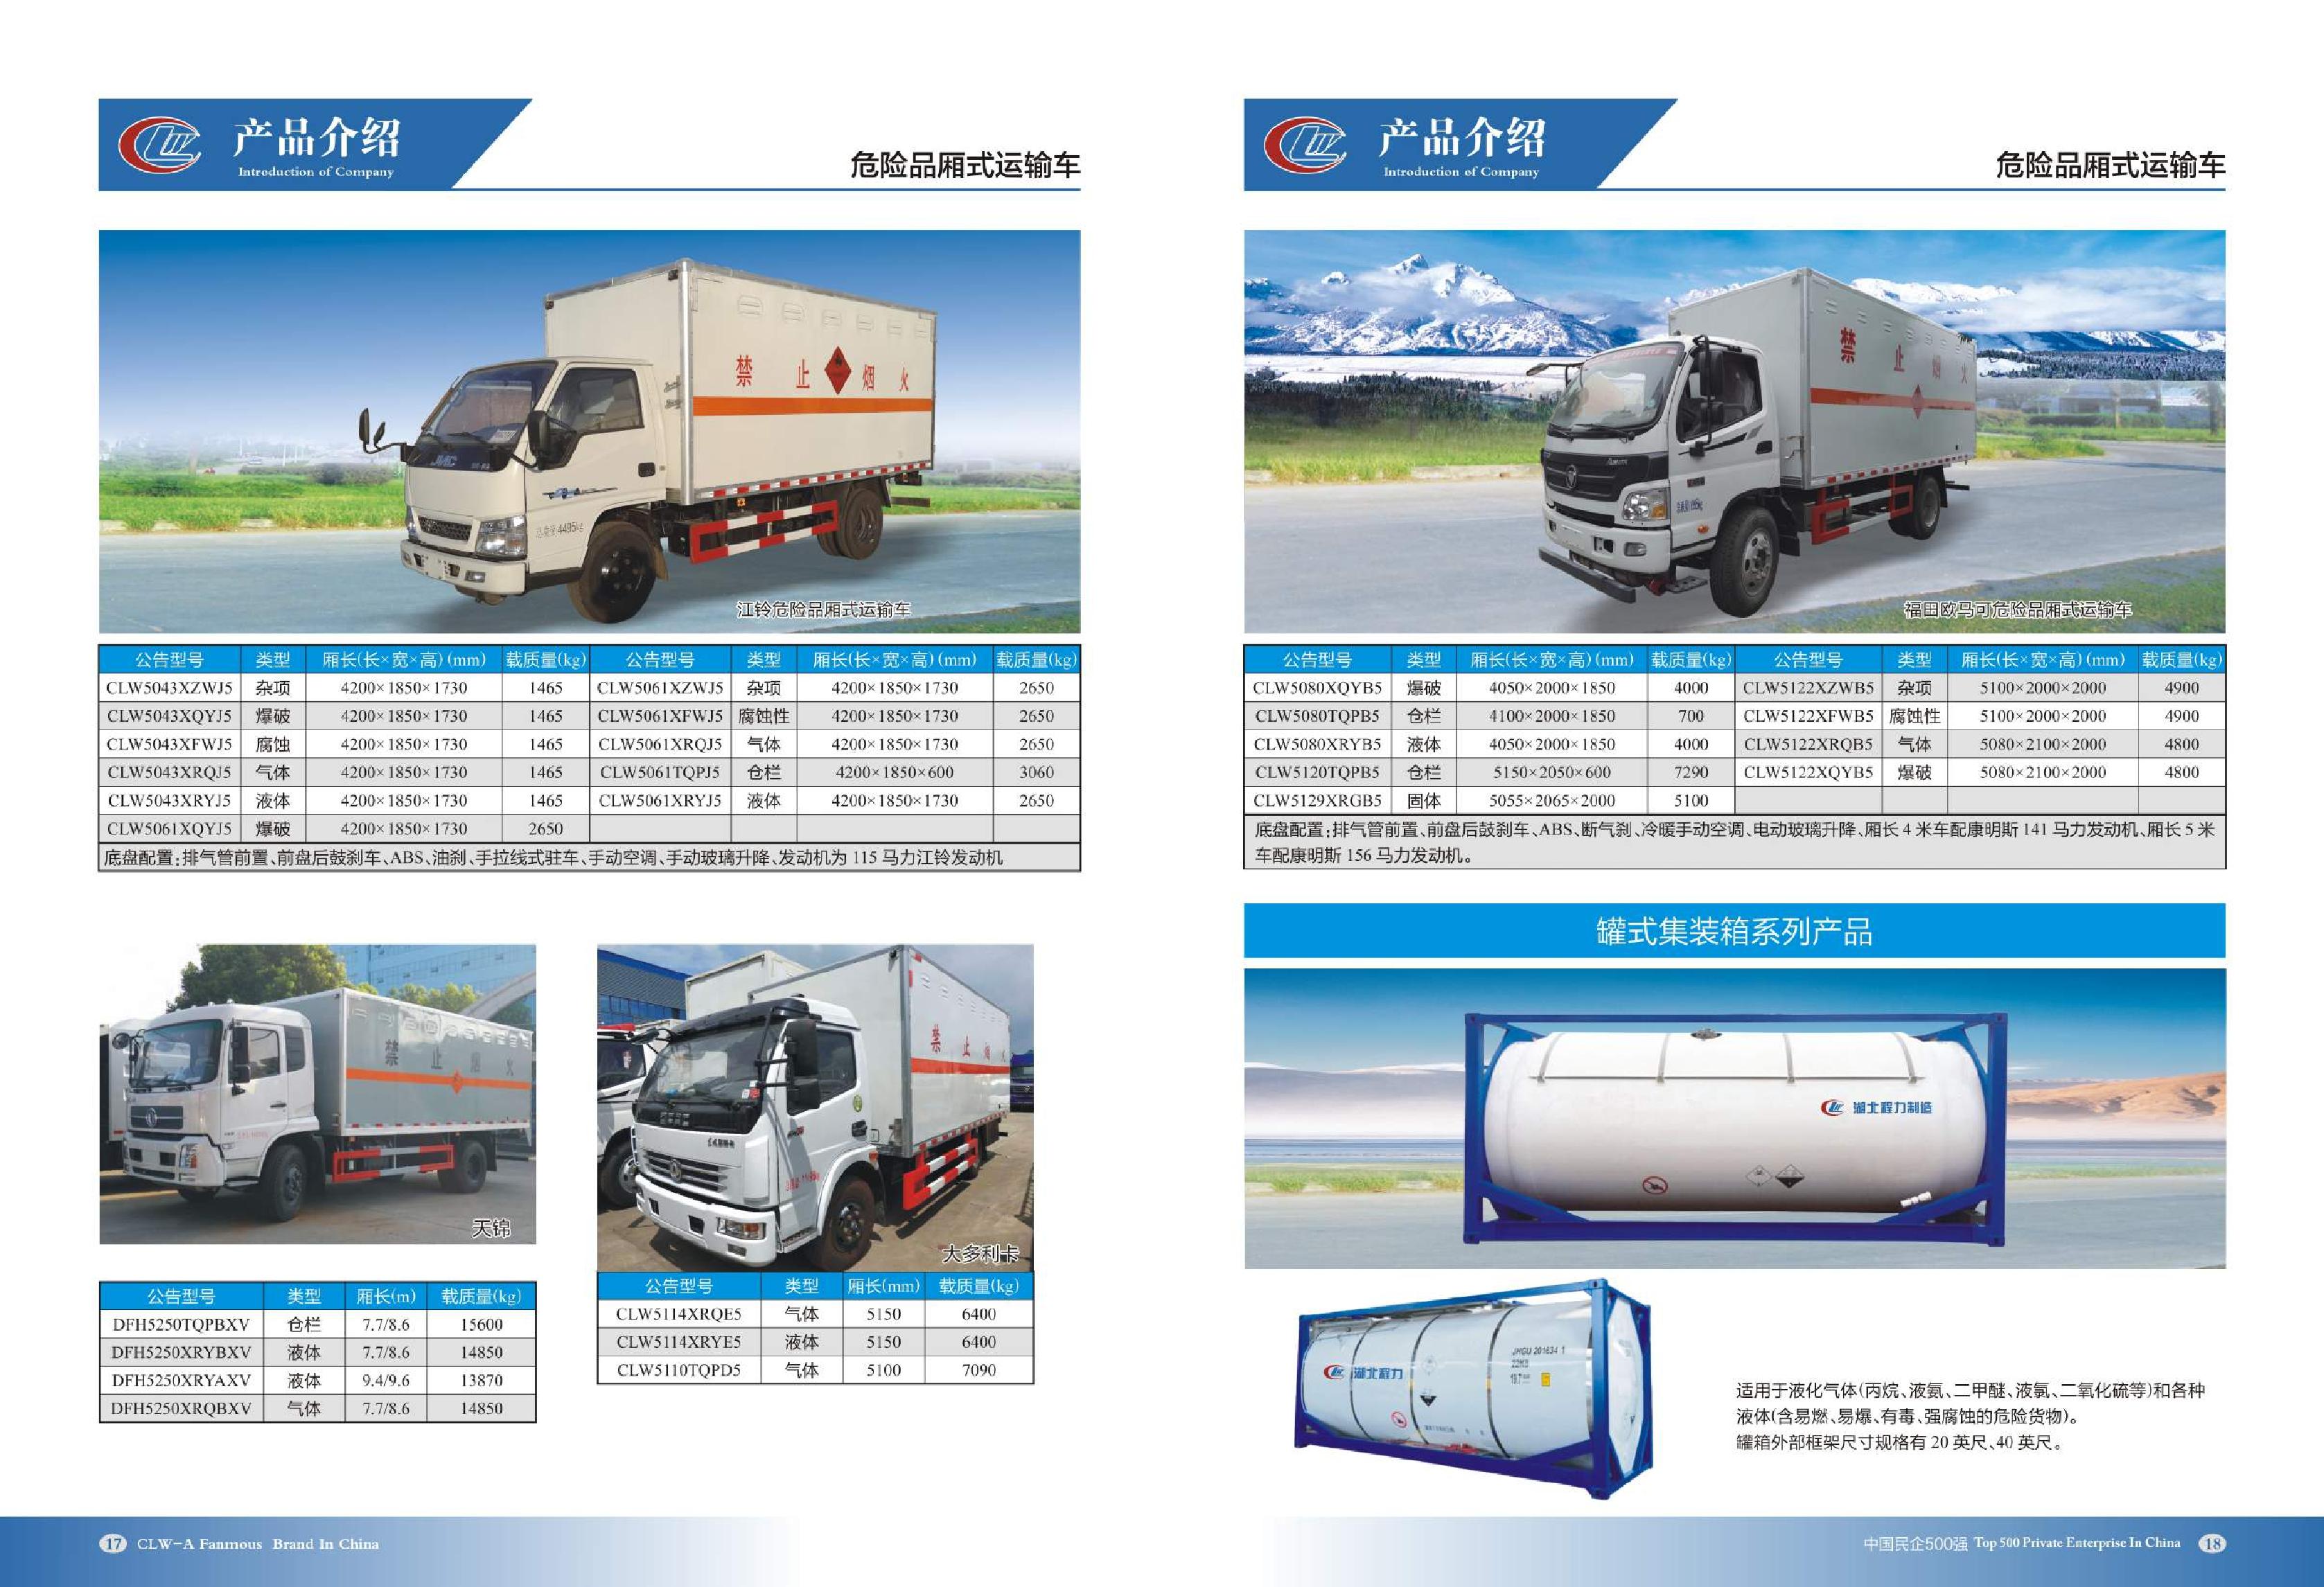 CLW BRAND LPG PRODUCTS CATALOG_9.jpg